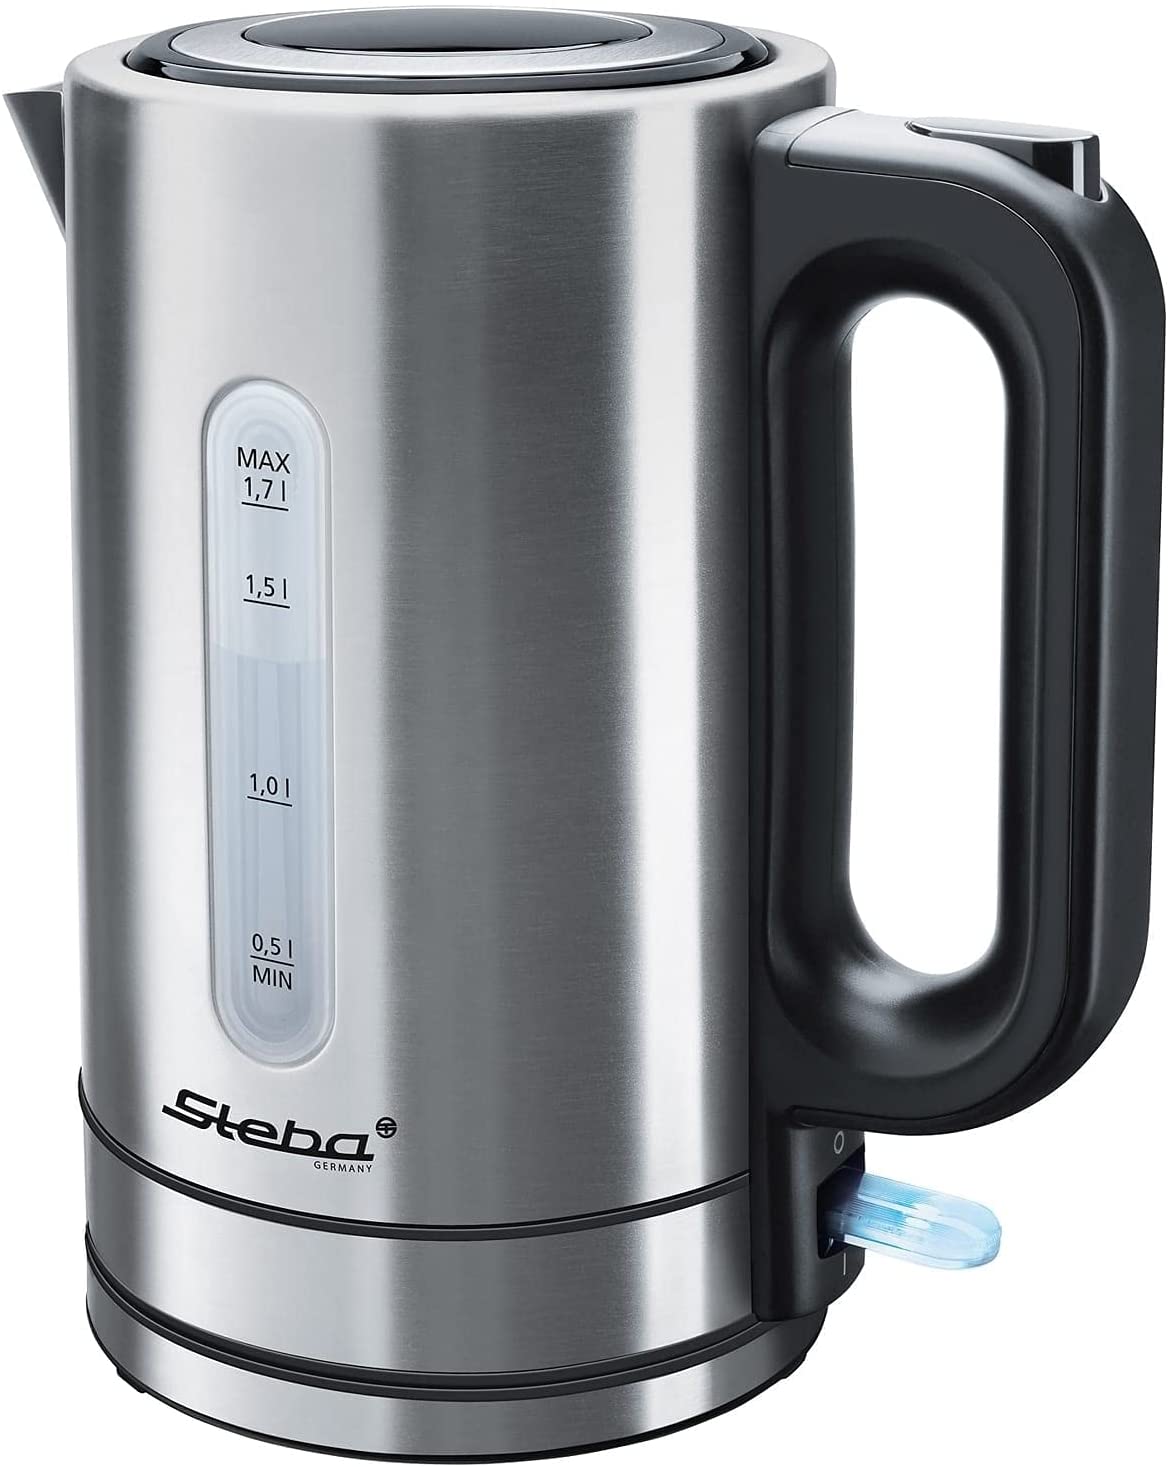 Steba WK 20 kettles (stainless steel), 1.7 litre capacity, easy lid opening at the touch of a button, water level indicator, easy to clean, automatic switch-off